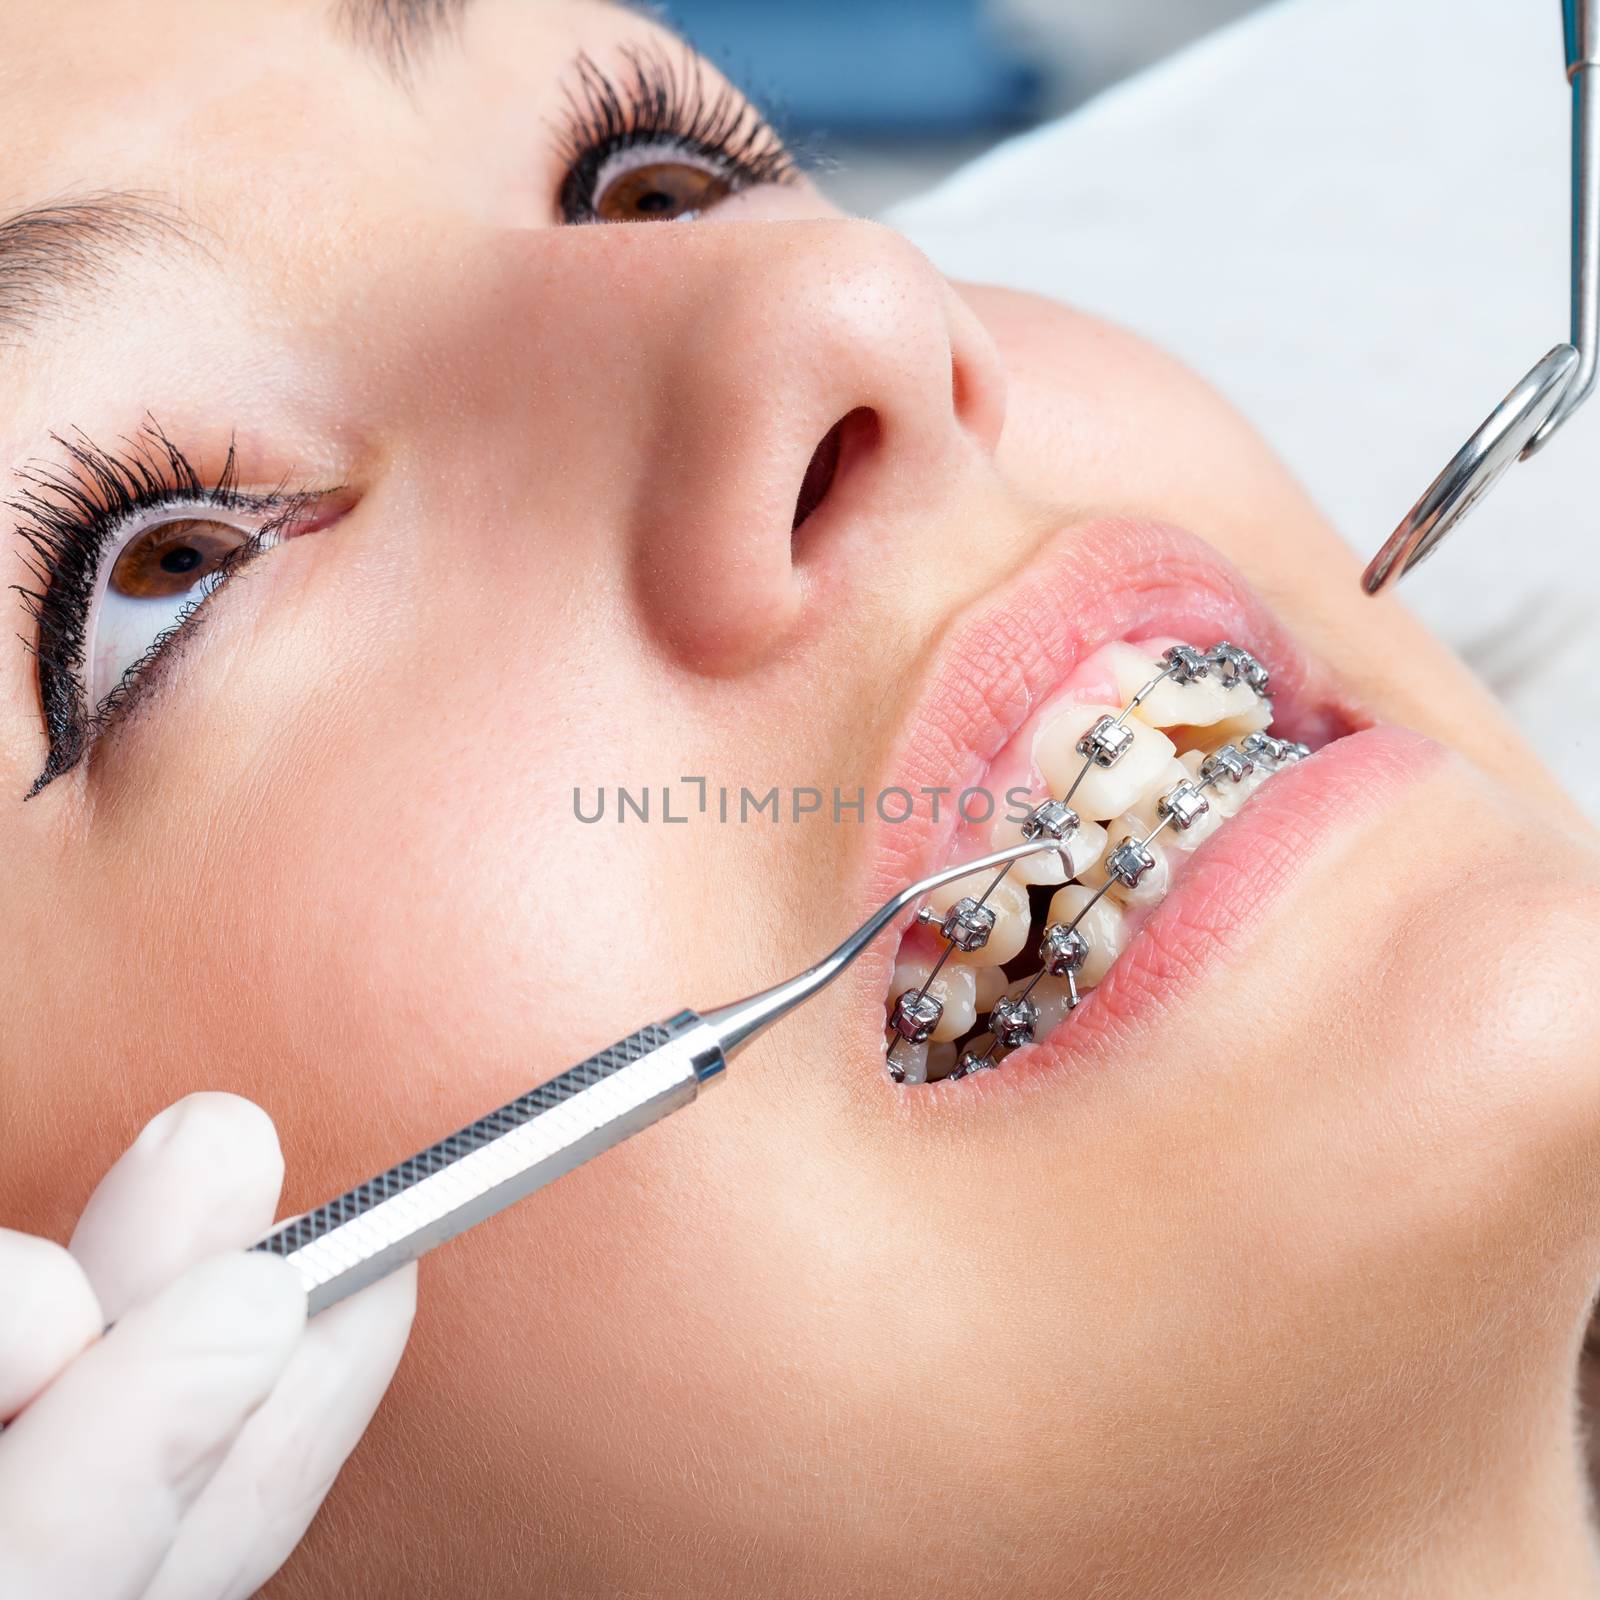 Extreme close up of hands working on dental braces with hatchet and mouth mirror. Macro close up of female mouth showing dental braces.